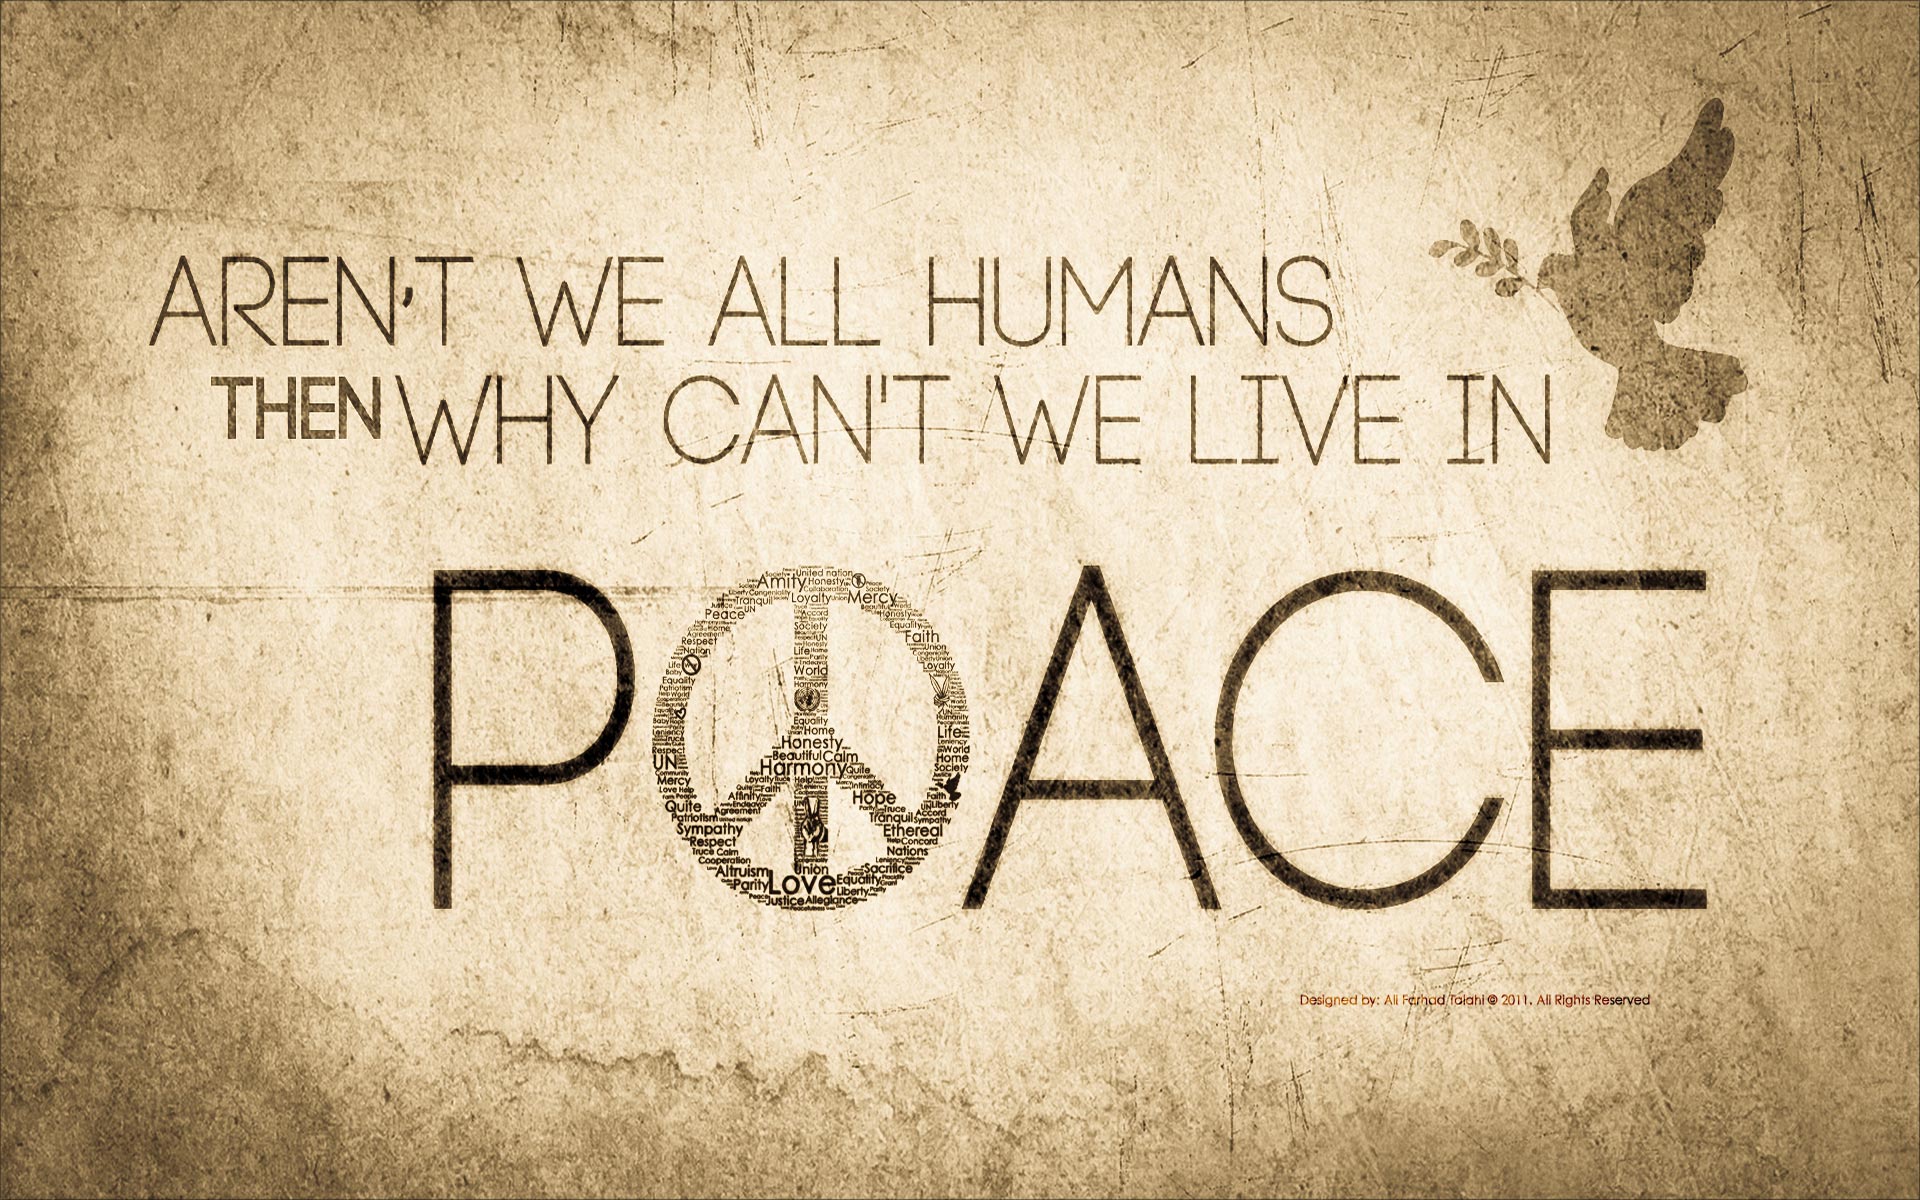 Do You Really Want To Know The Real Meaning Of Peace?